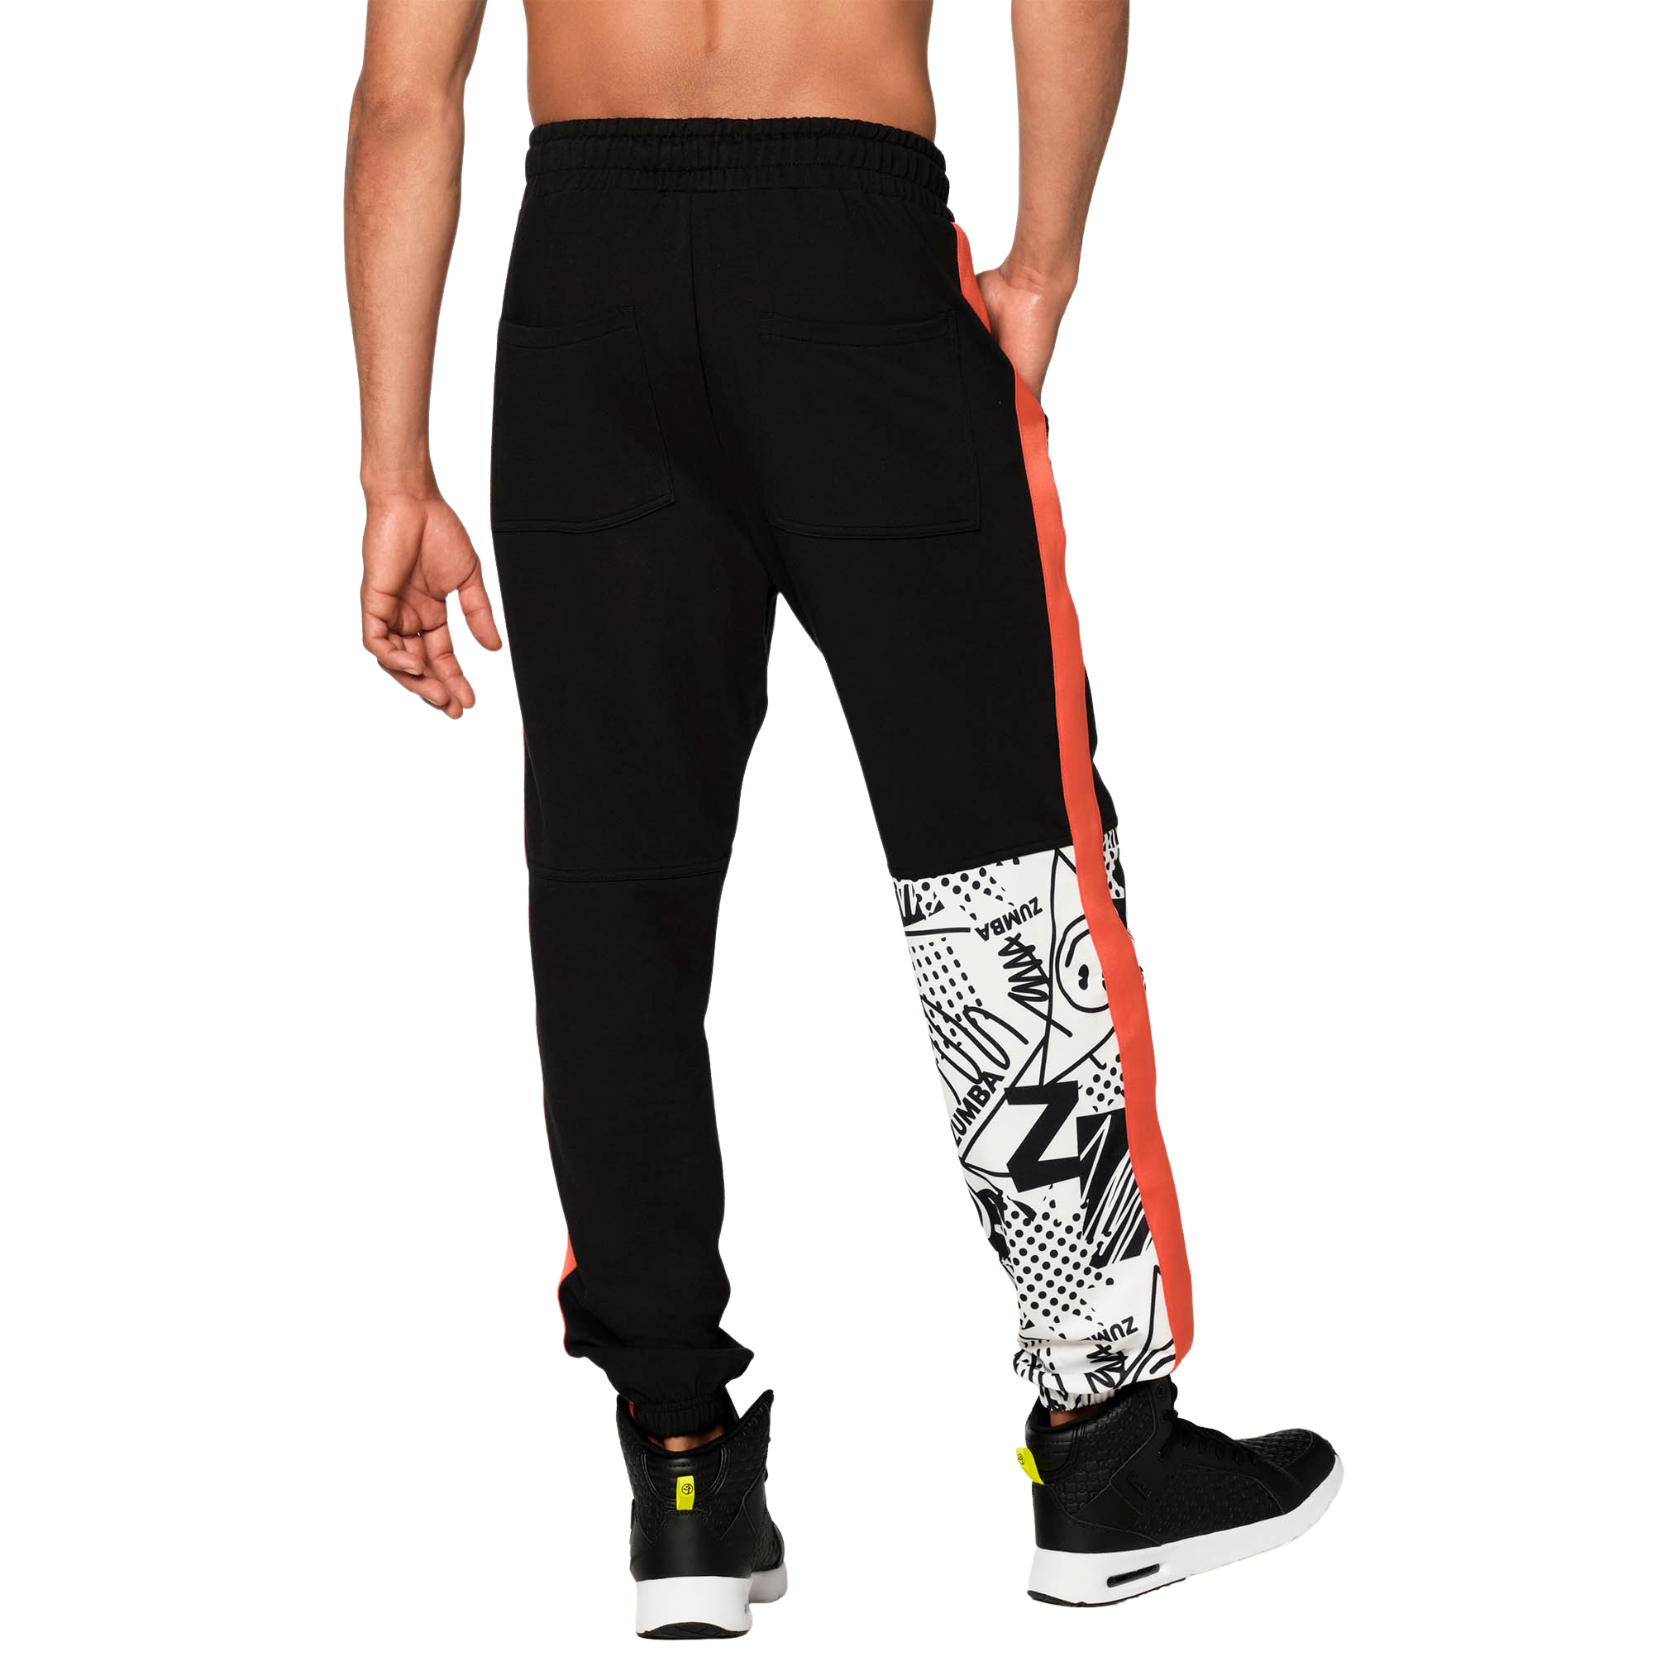 Zumba Fun And Happy Men's Sweatpants (Special Order)